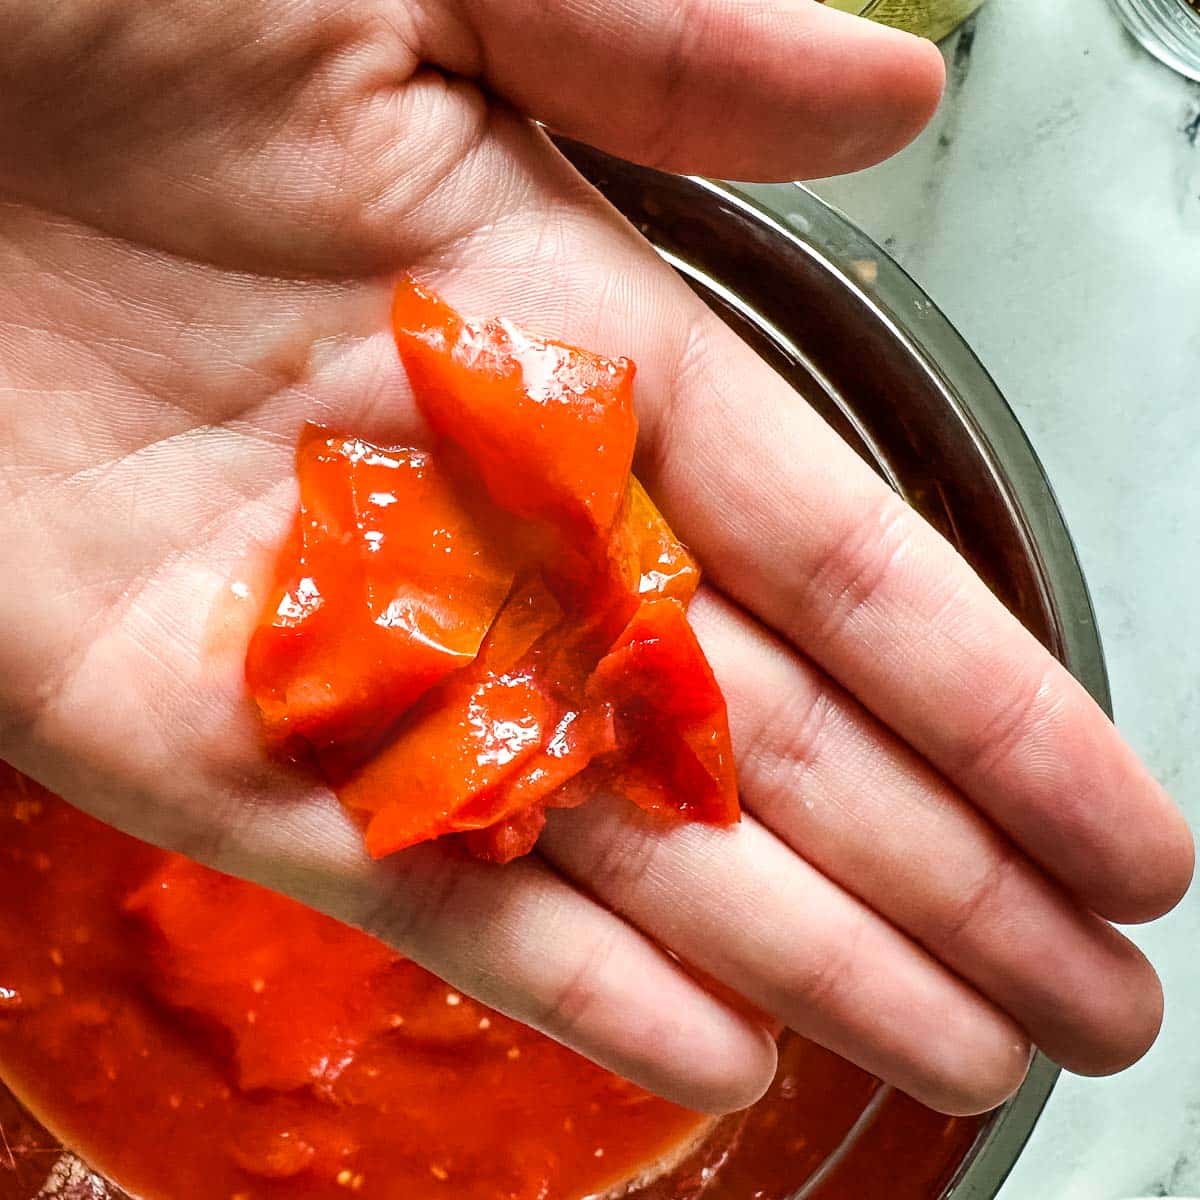 The peel from a tomato is shown in the palm of a person's hand.